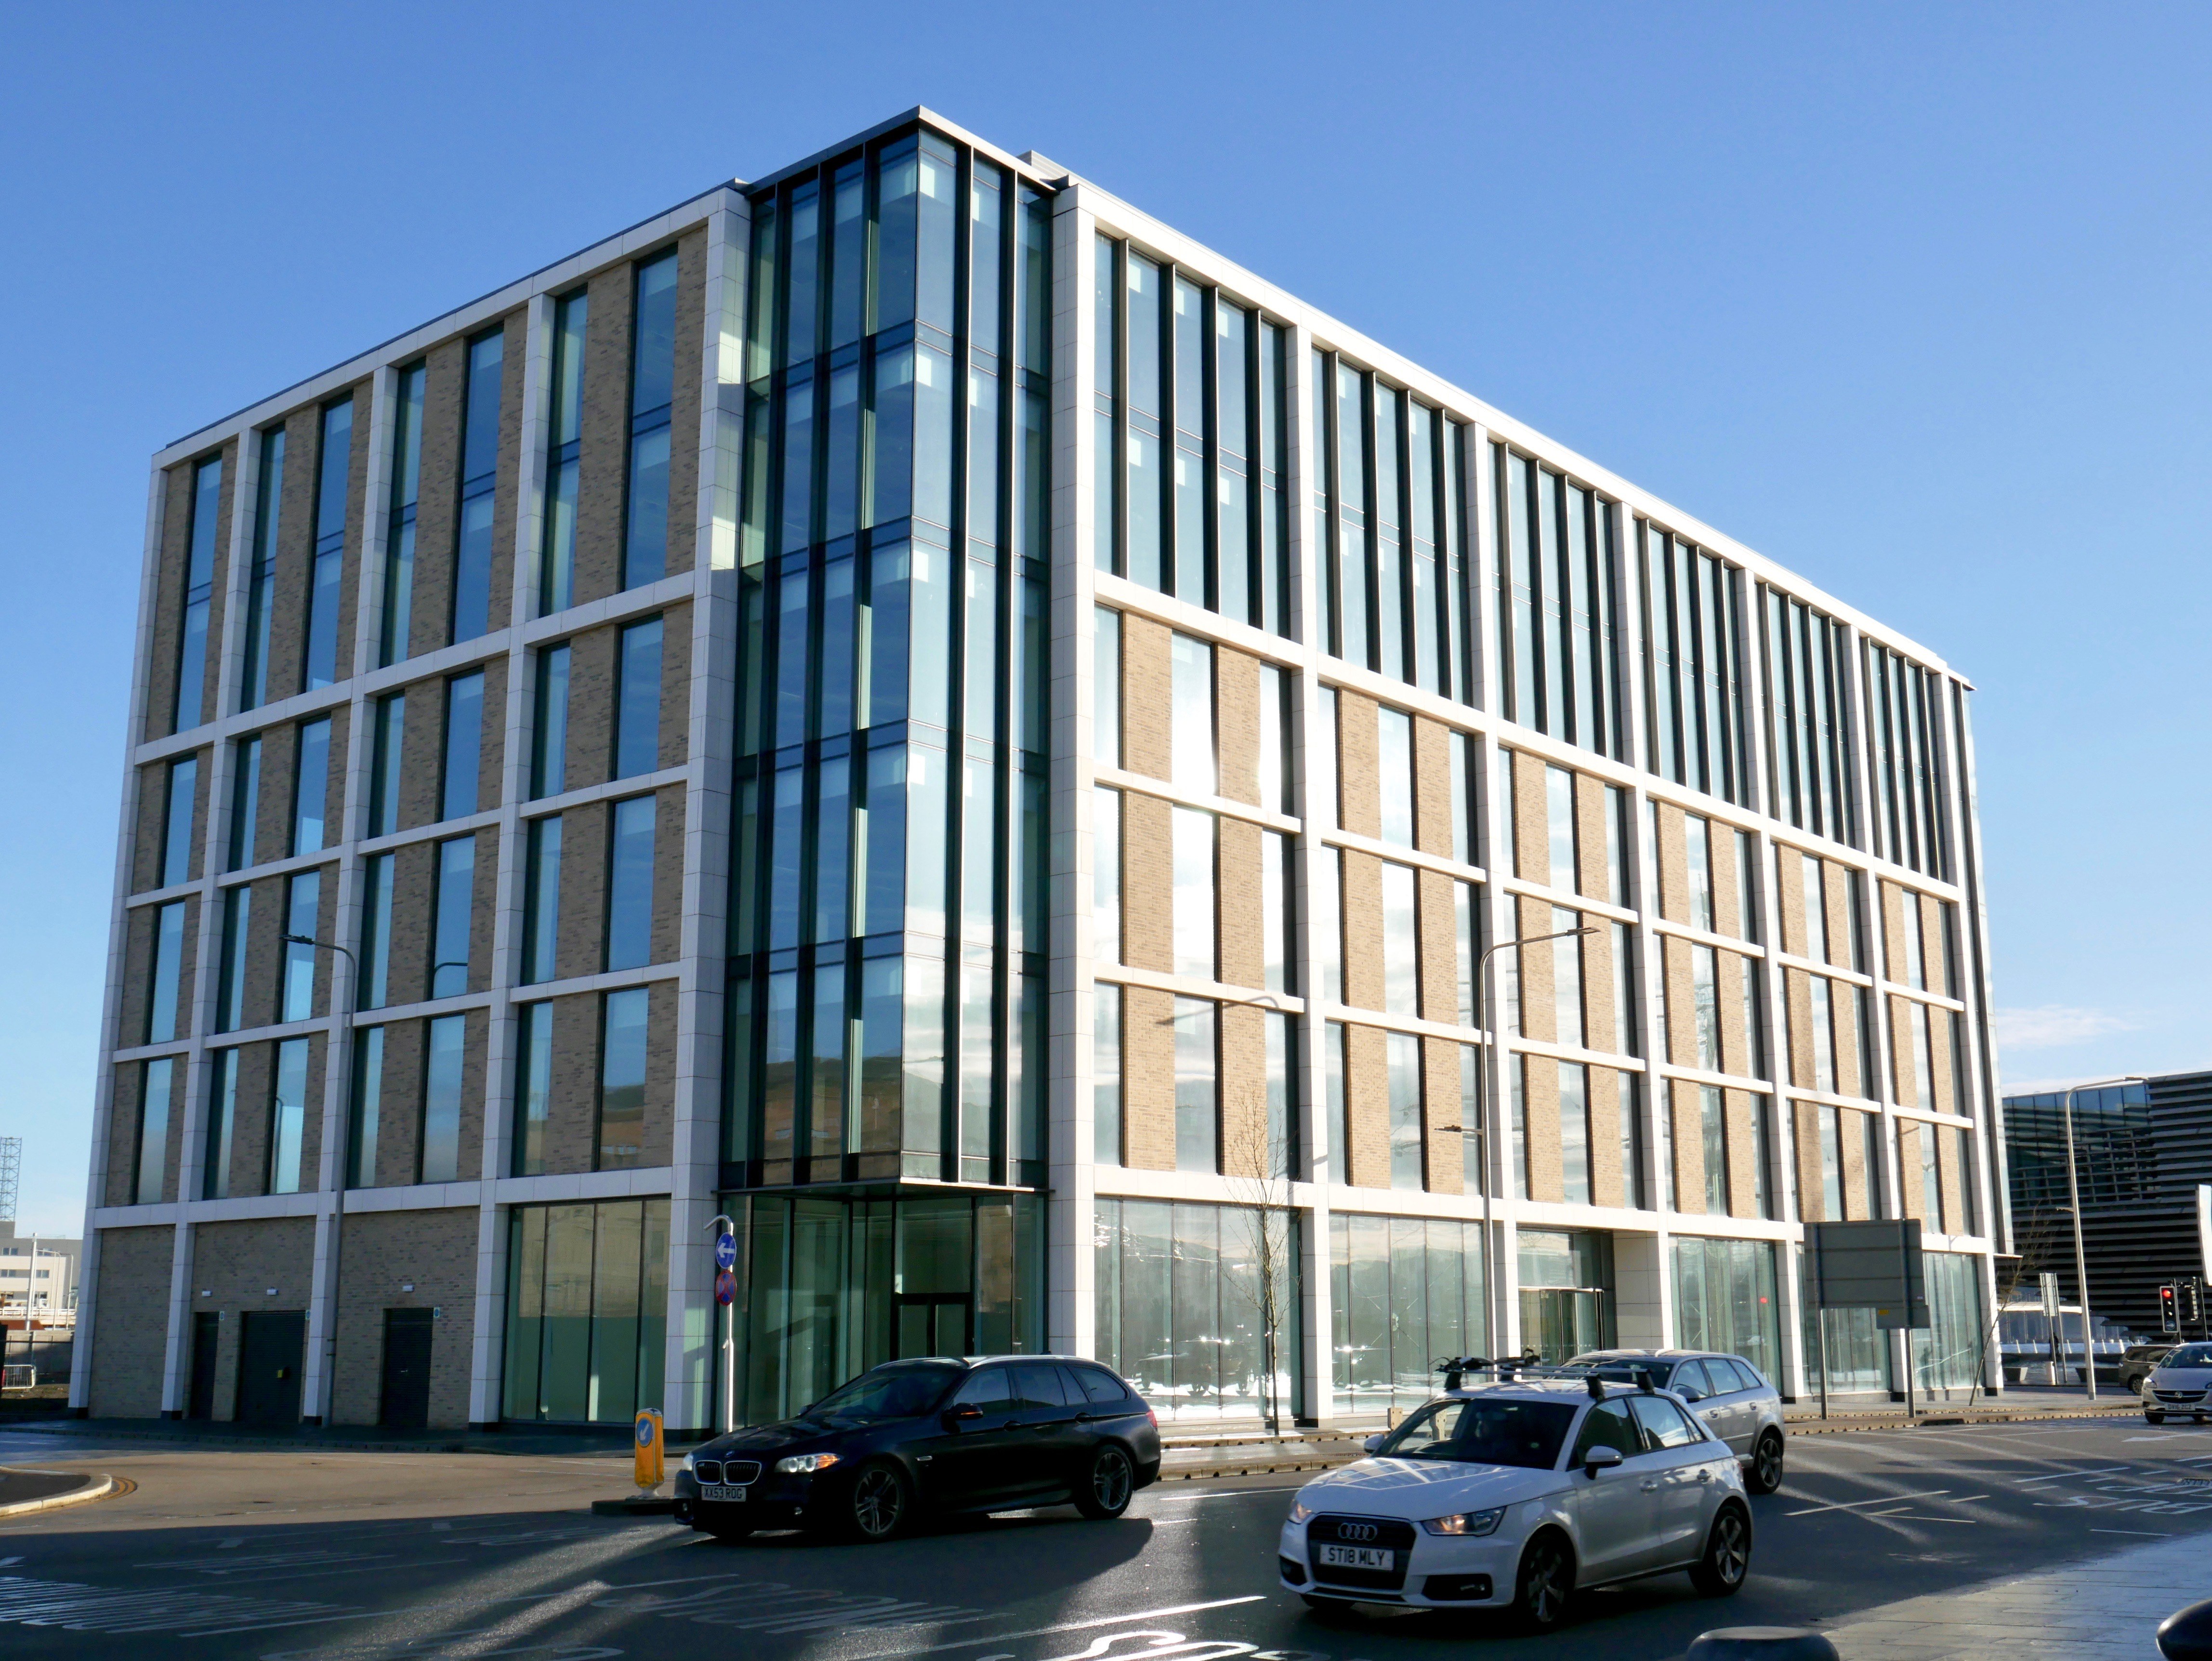 New head office in Dundee - Agnes Husband House